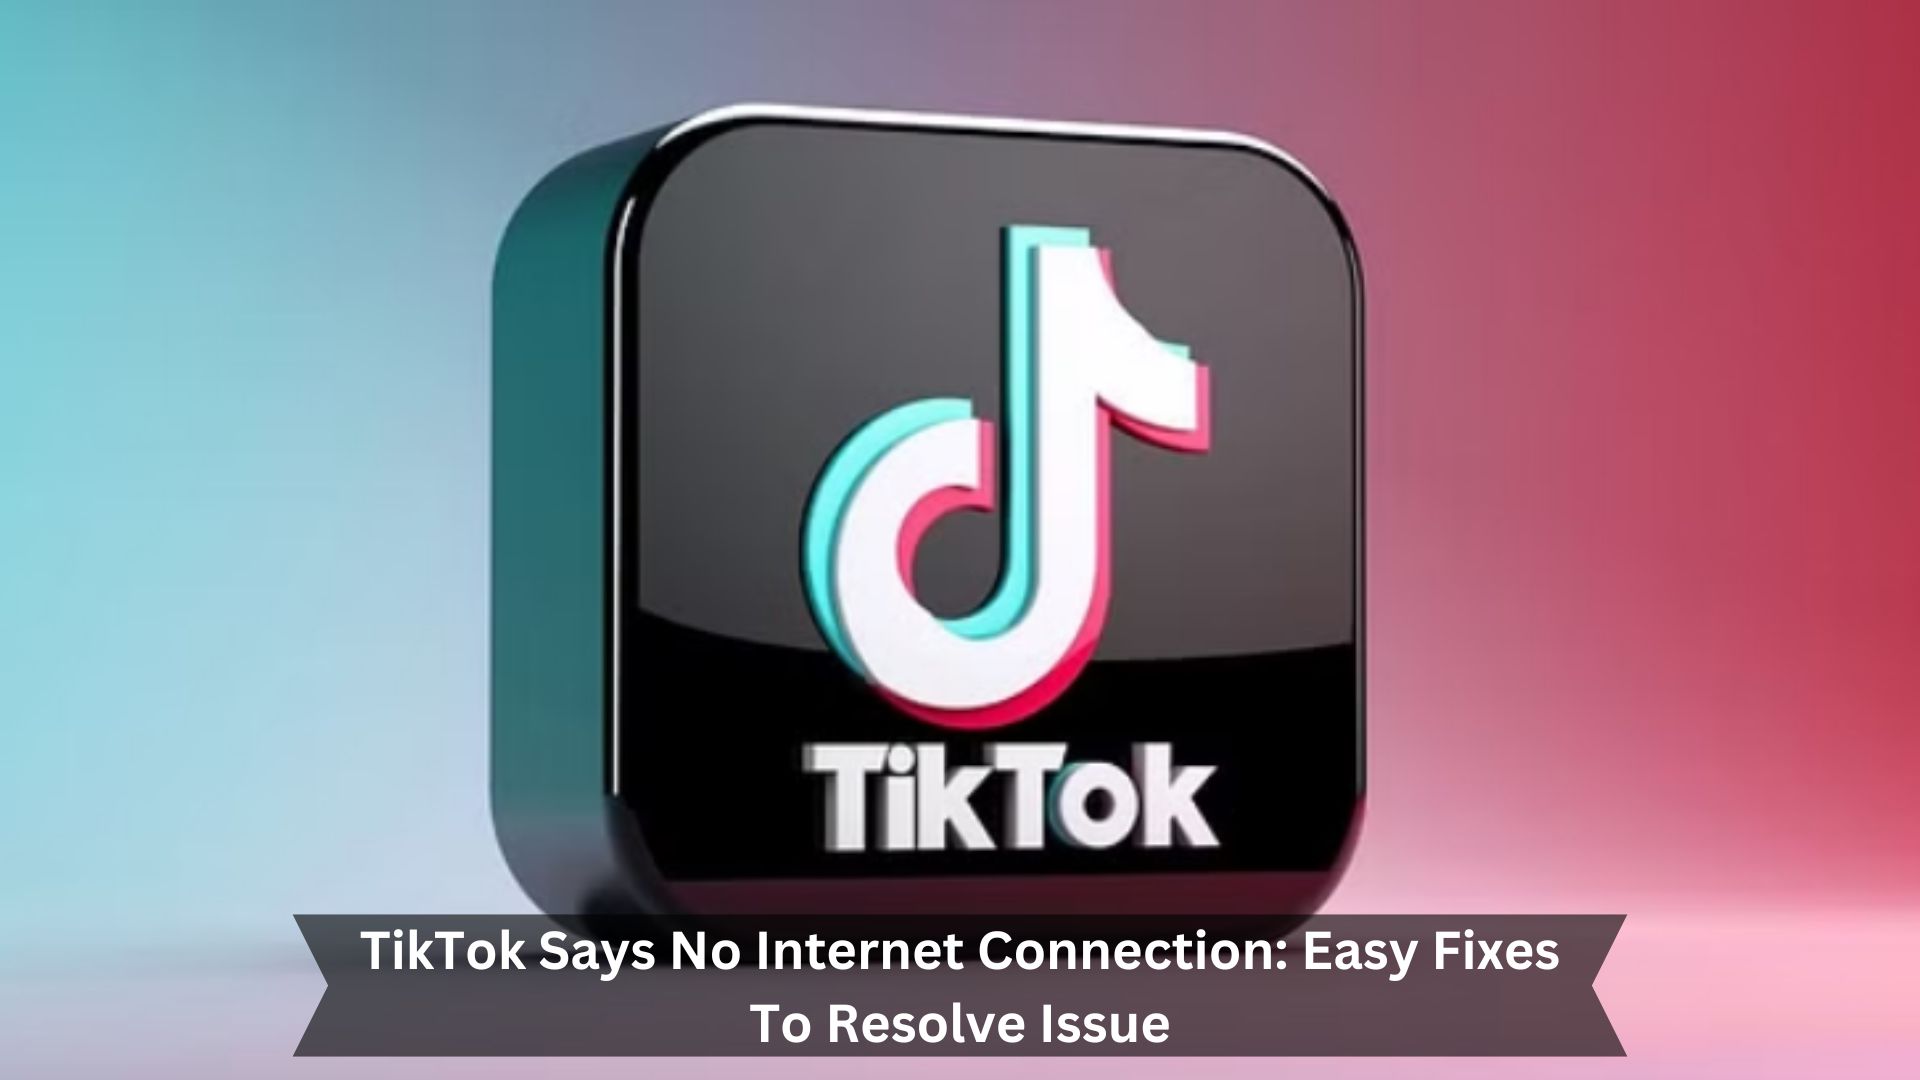 TikTok-Says-No-Internet-Connection-Easy-Fixes-To-Resolve-Issue